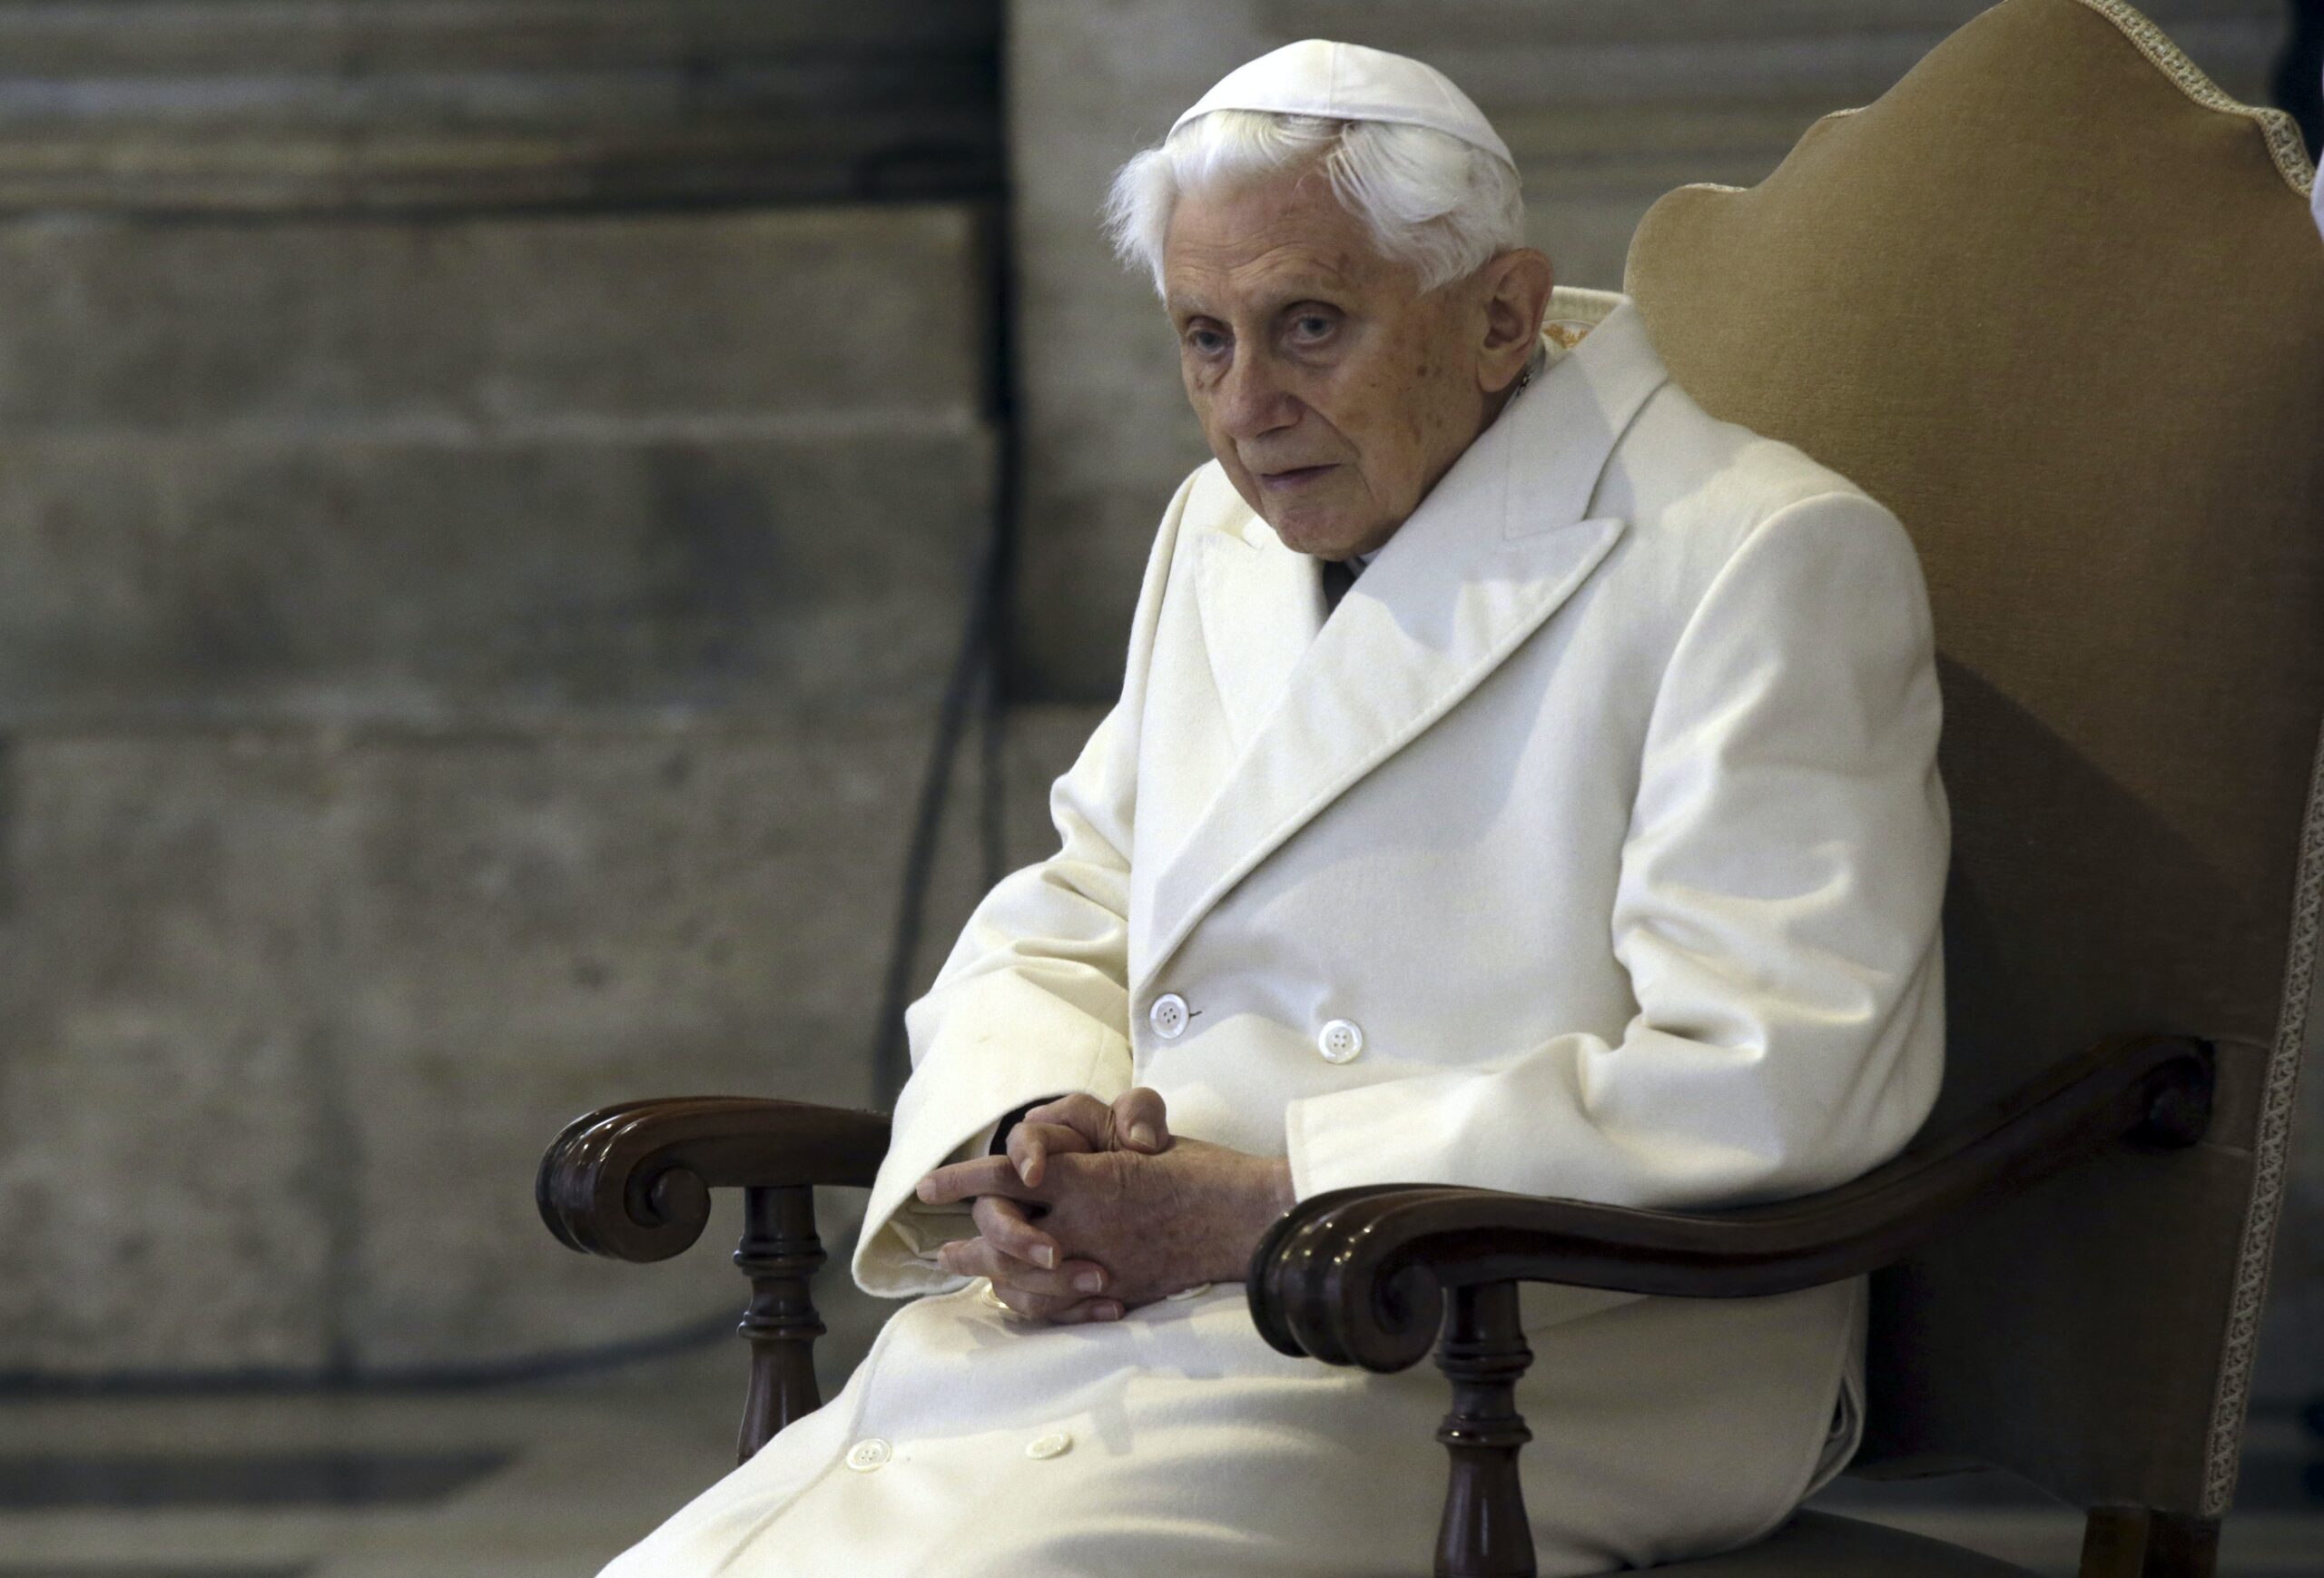 Pope Emeritus Benedict XVI sits in St. Peter's Basilica on Dec. 8, 2015. A long-awaited report on sexual abuse faulted his handling of four cases. (AP Photo/Gregorio Borgia)